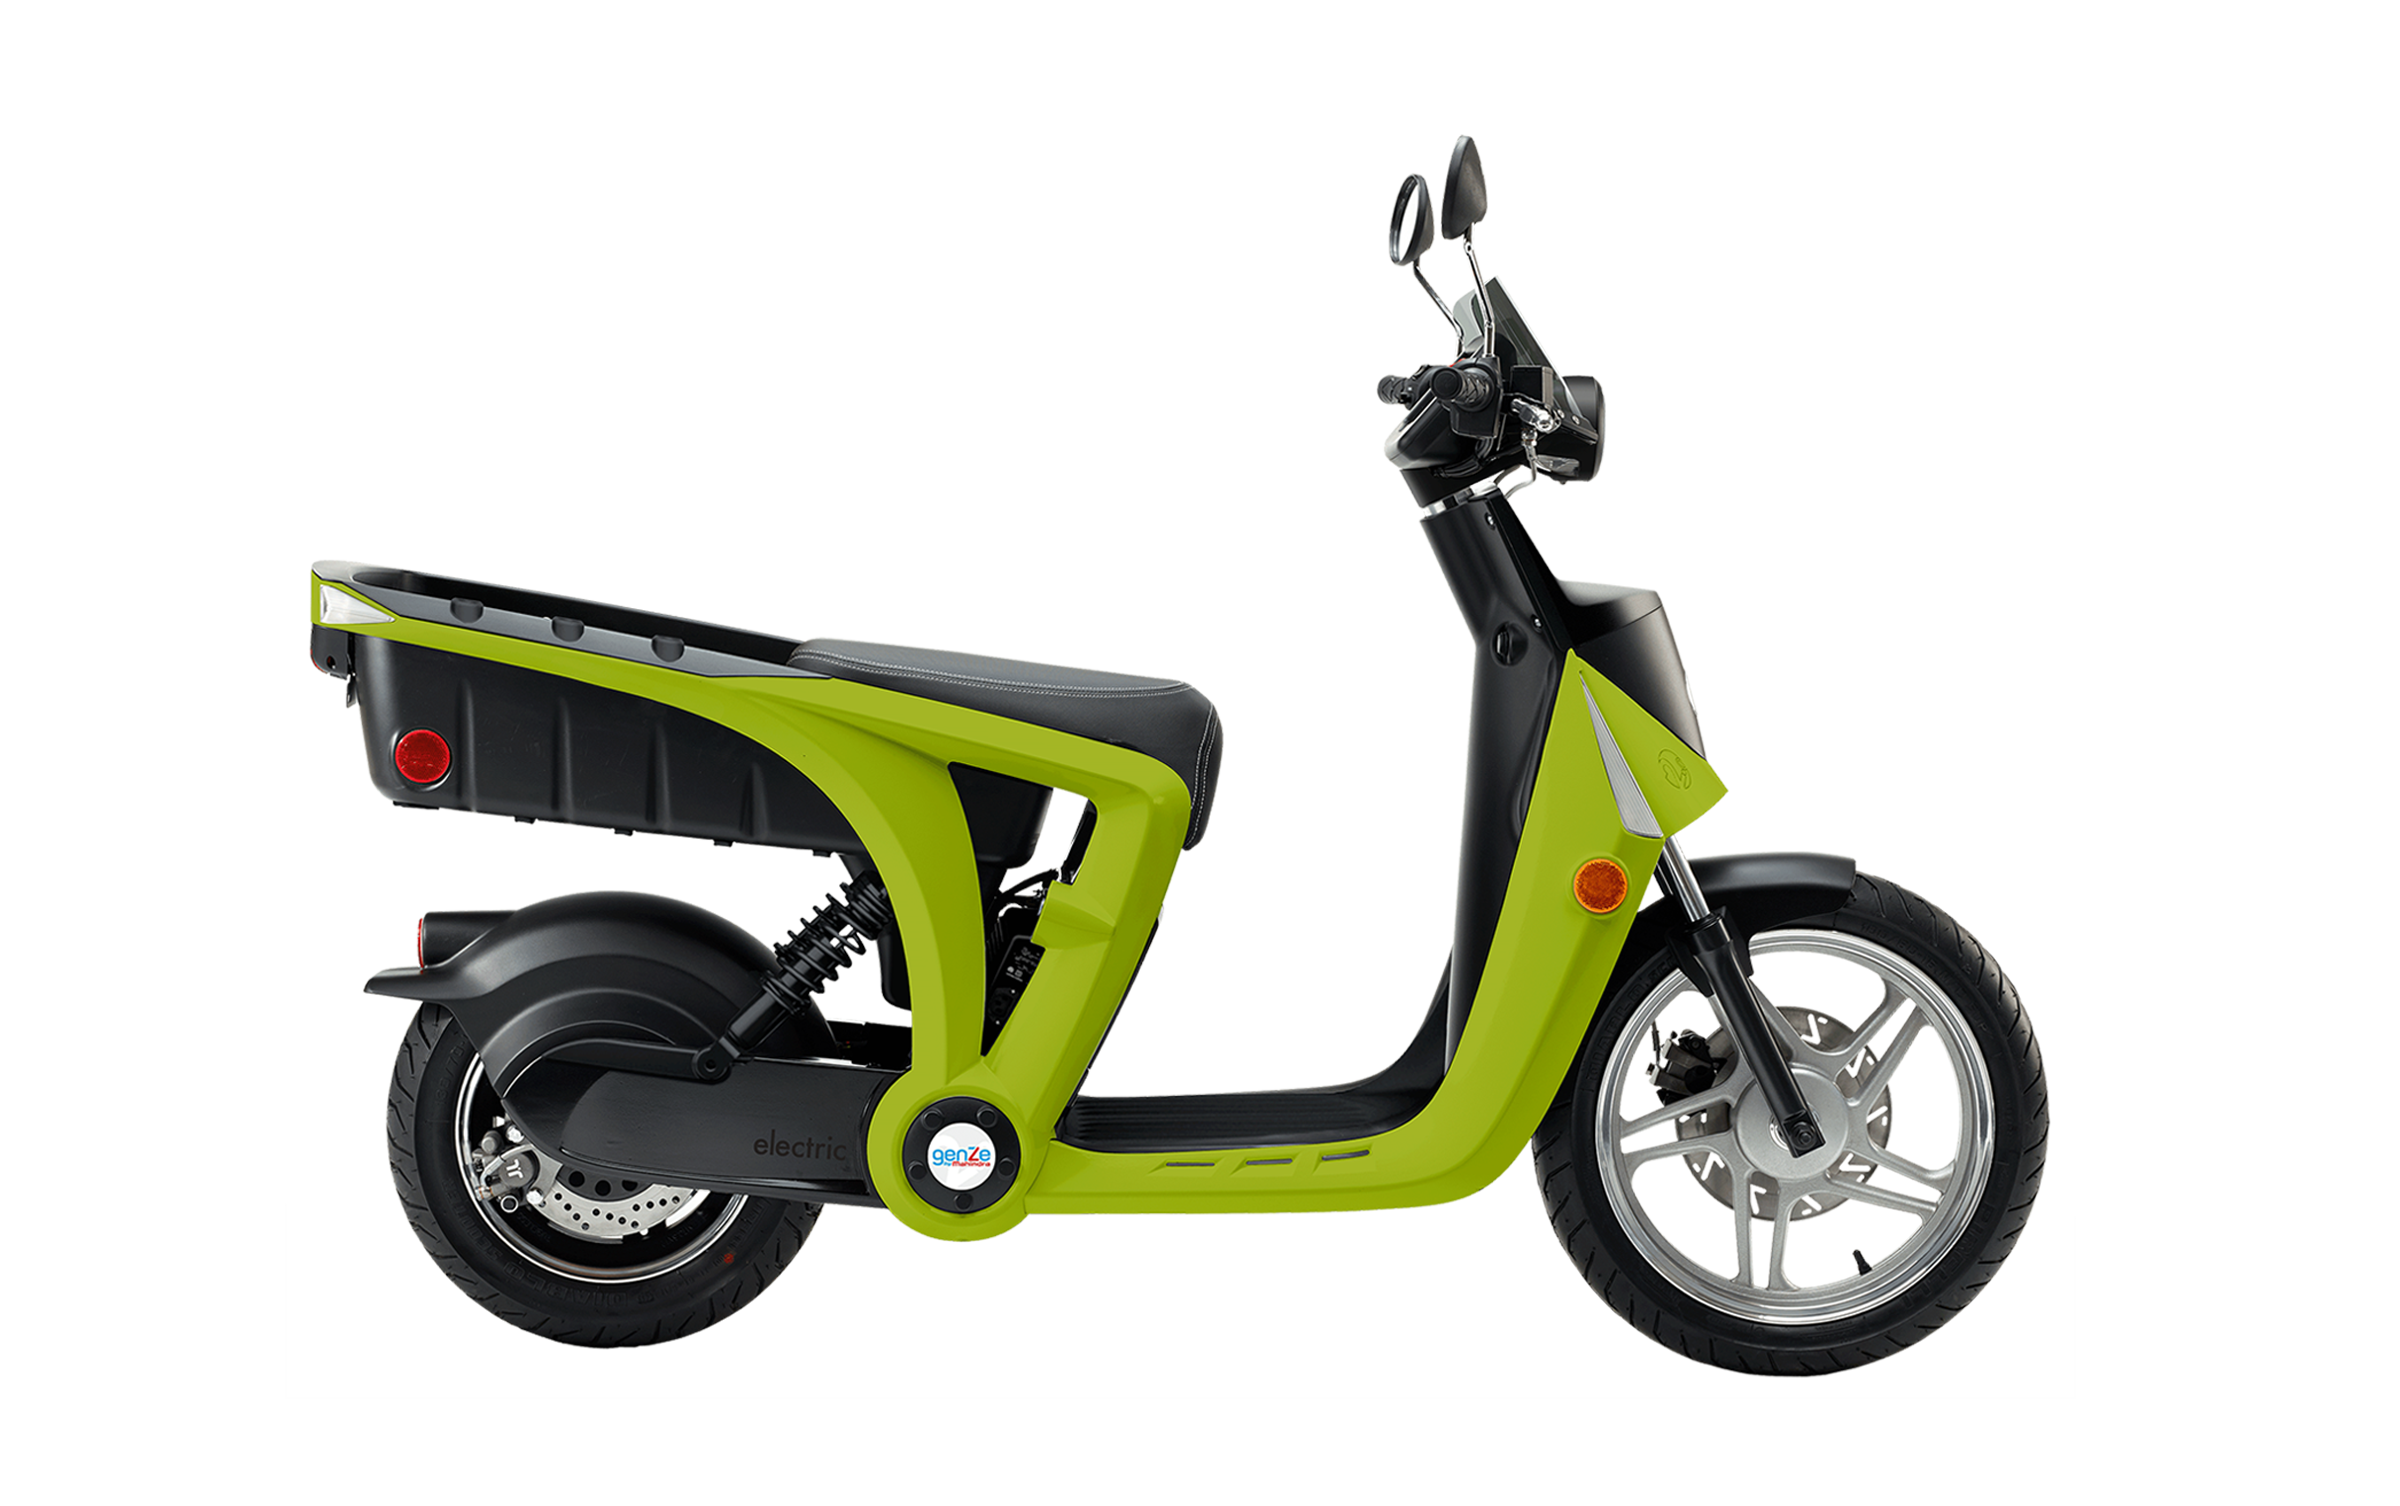 Scooter clipart delivery scooter. Electric scooters bikes genze